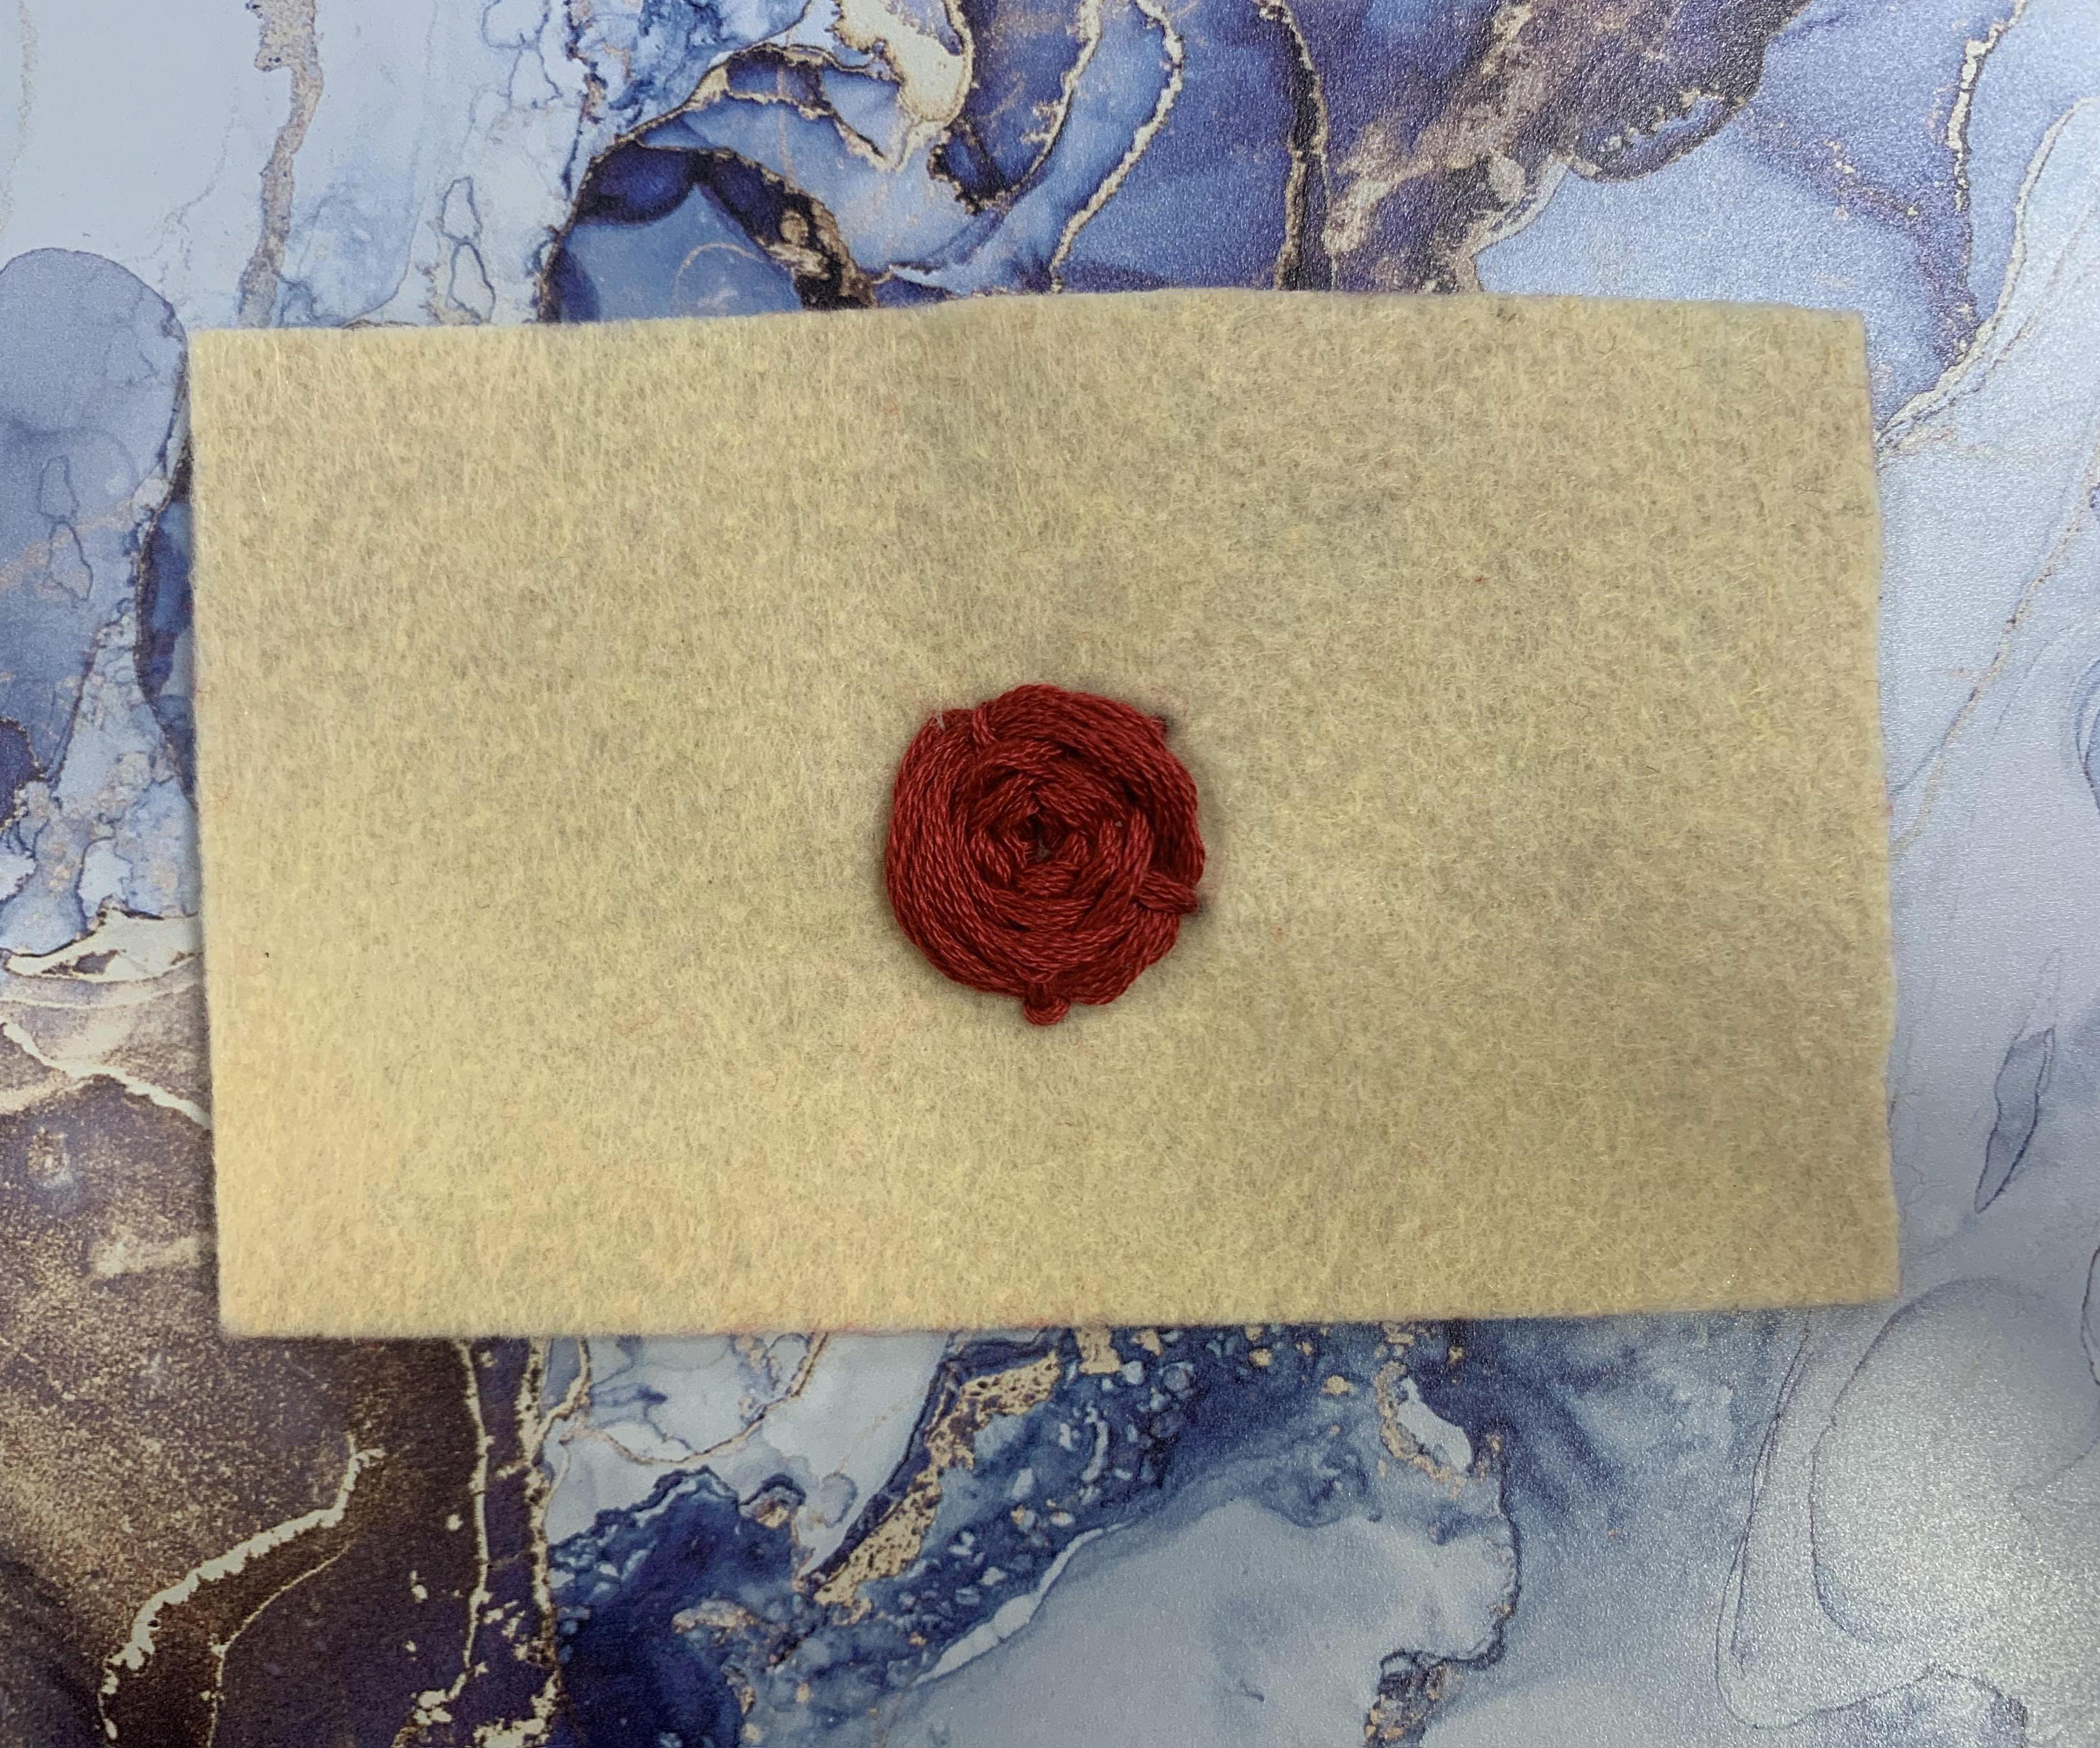 How to Make an Embroidery Rose